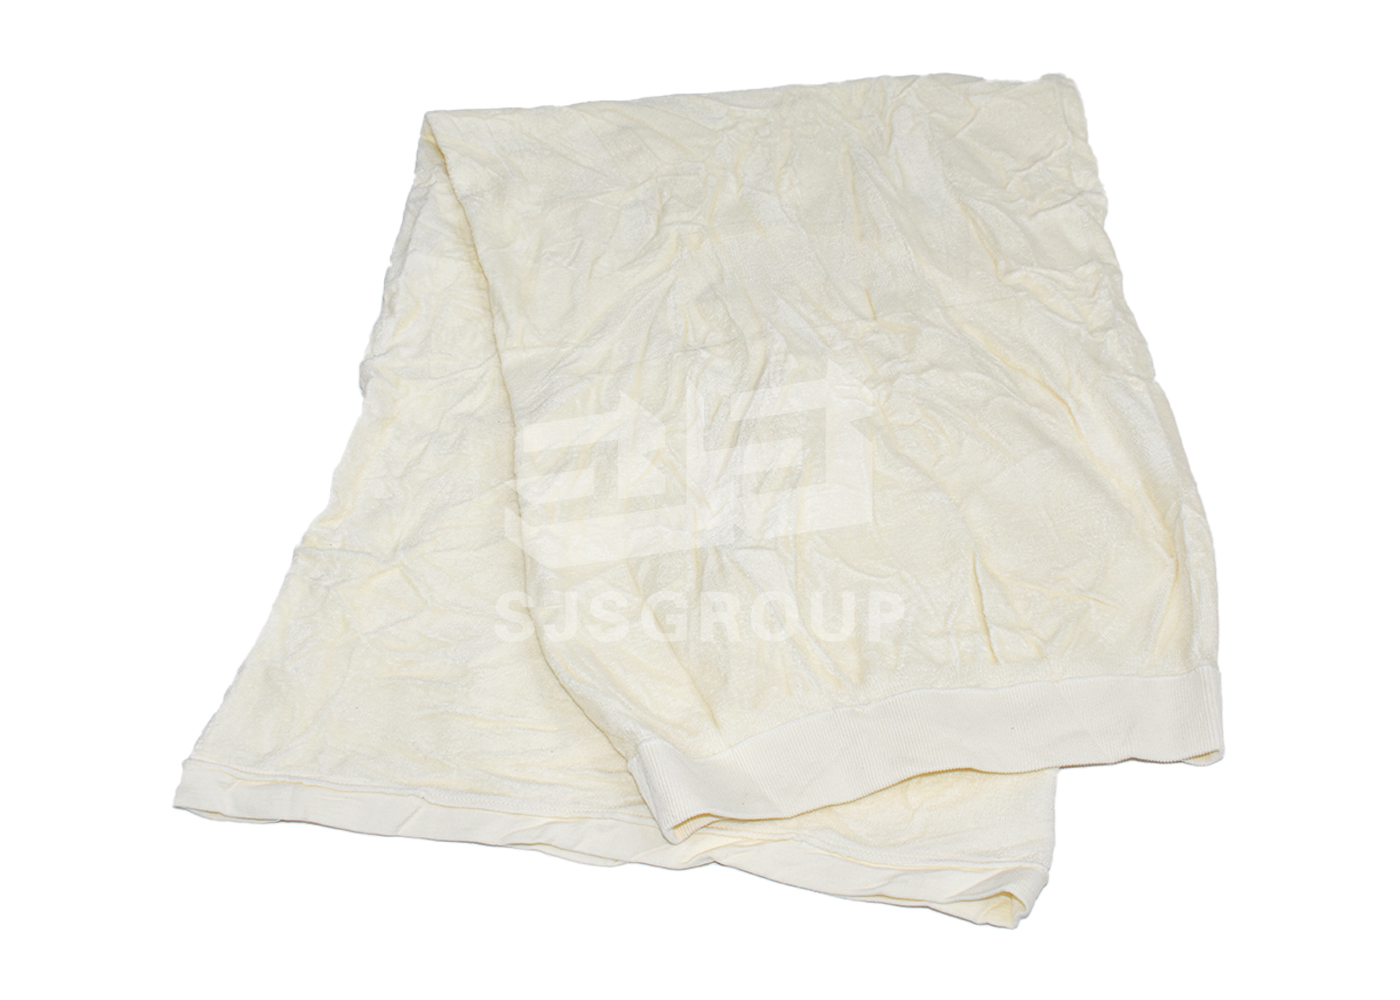 New White Cotton Rags-Off-white cloth cotton rags (new)